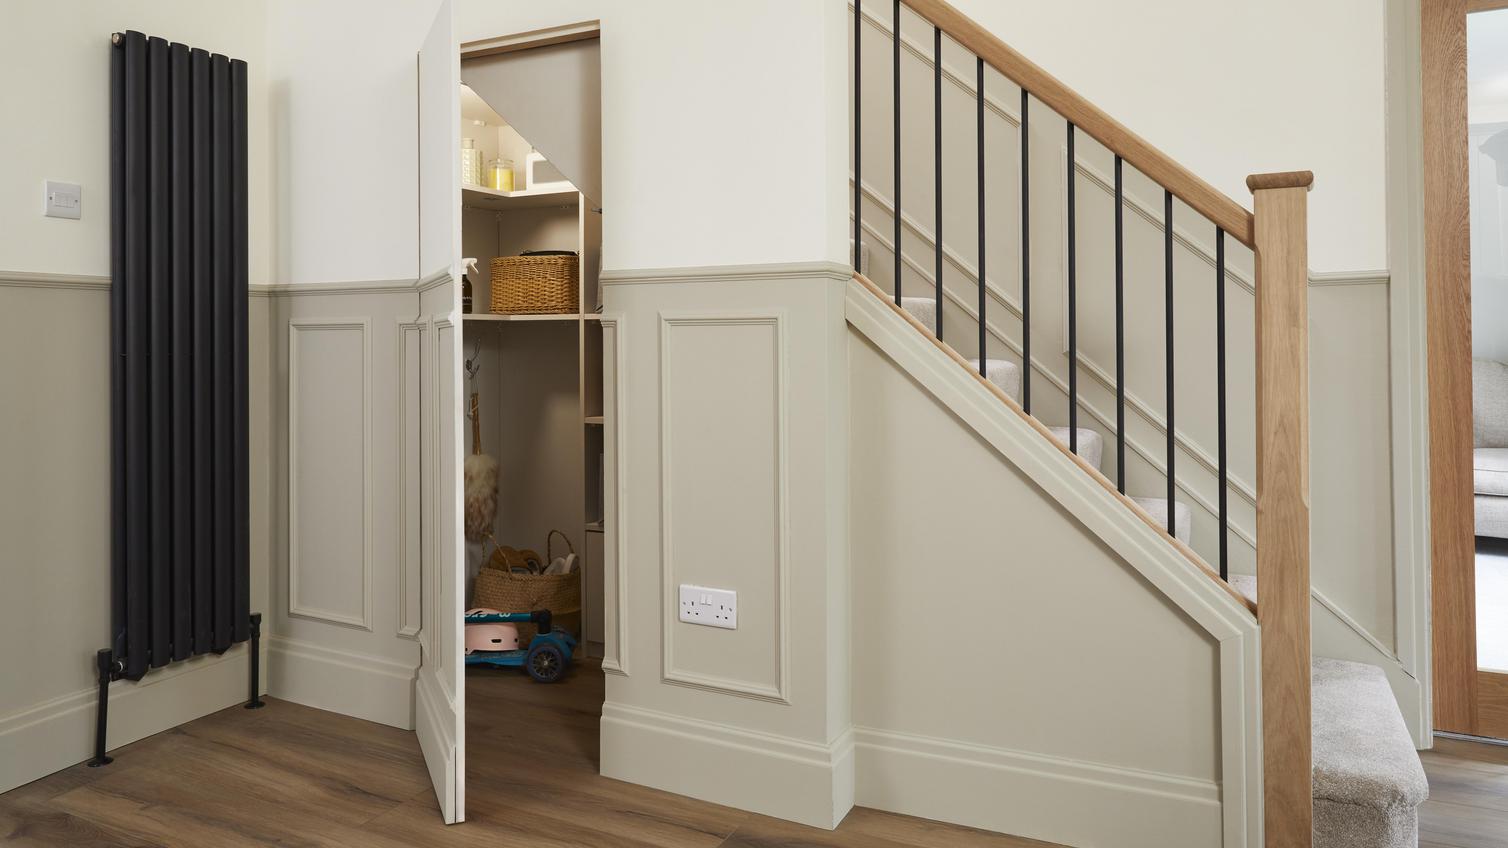 The under-stair storage area with the door ajar, decorated with panelling.